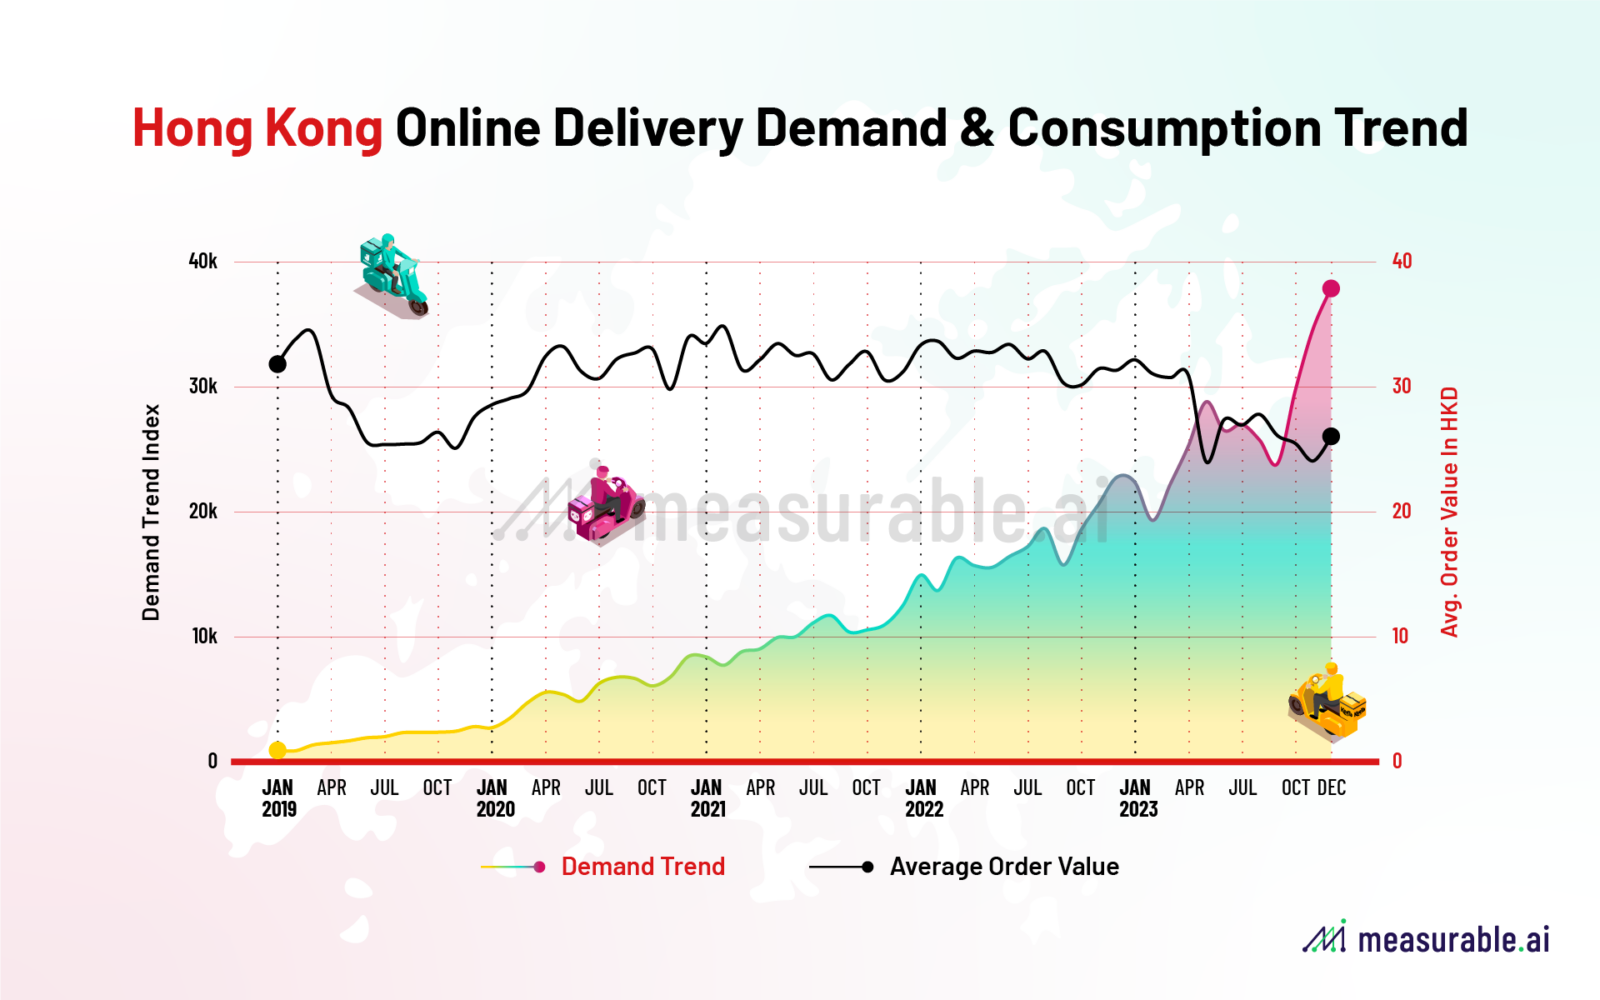 Hong Kong Online Delivery Demand & Consumption Trend